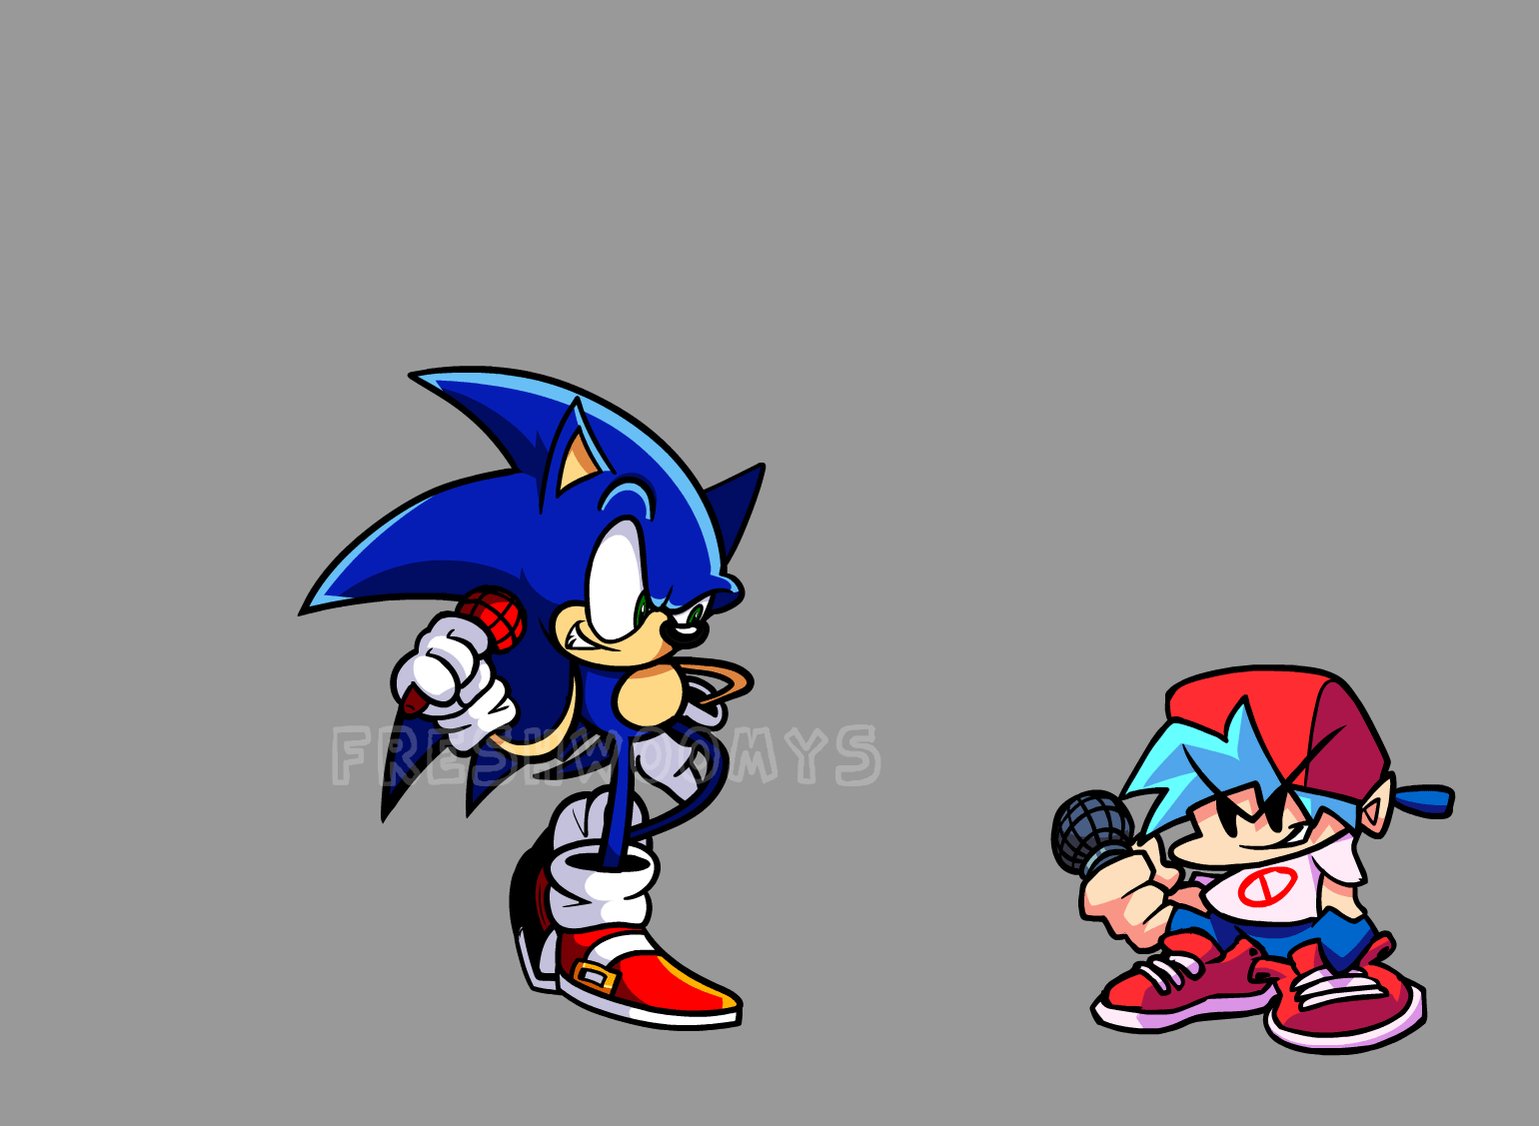 FreshWoomy on X: heres the finished fnf sonic sprites i made! this was  honestly pretty fun to do and might be one of my favorite fnf sprites that  i've done so far